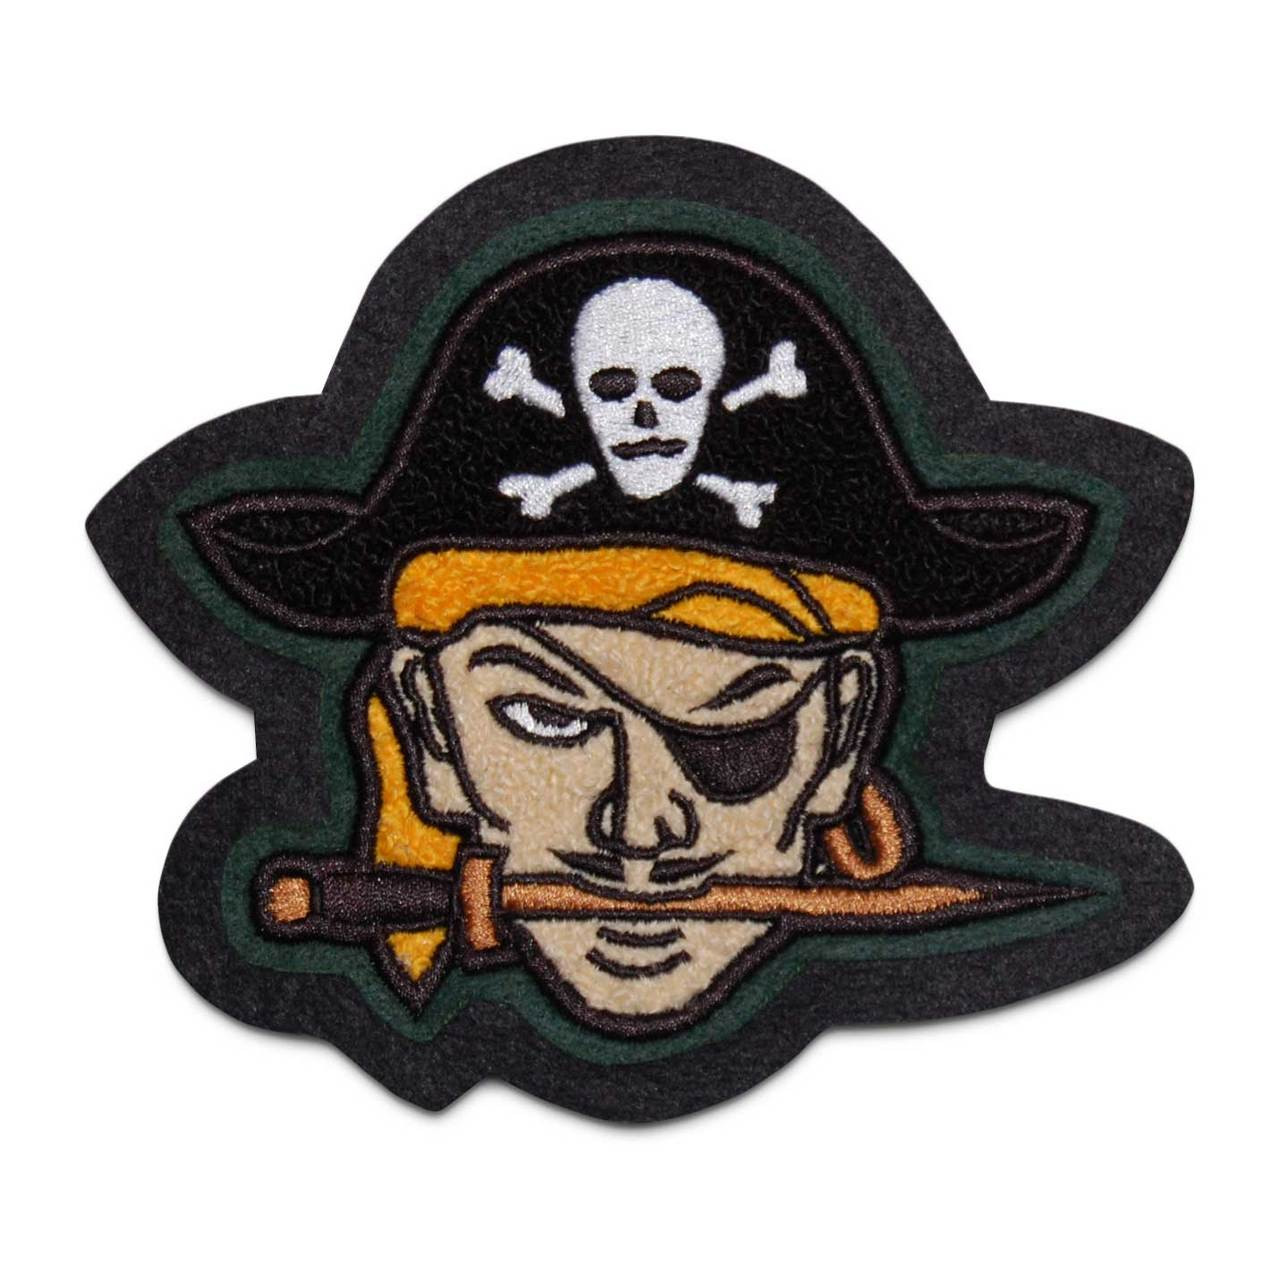 Pirate Mascot 2 Chenille Patch - Mount Olympus Awards Mascot Patches